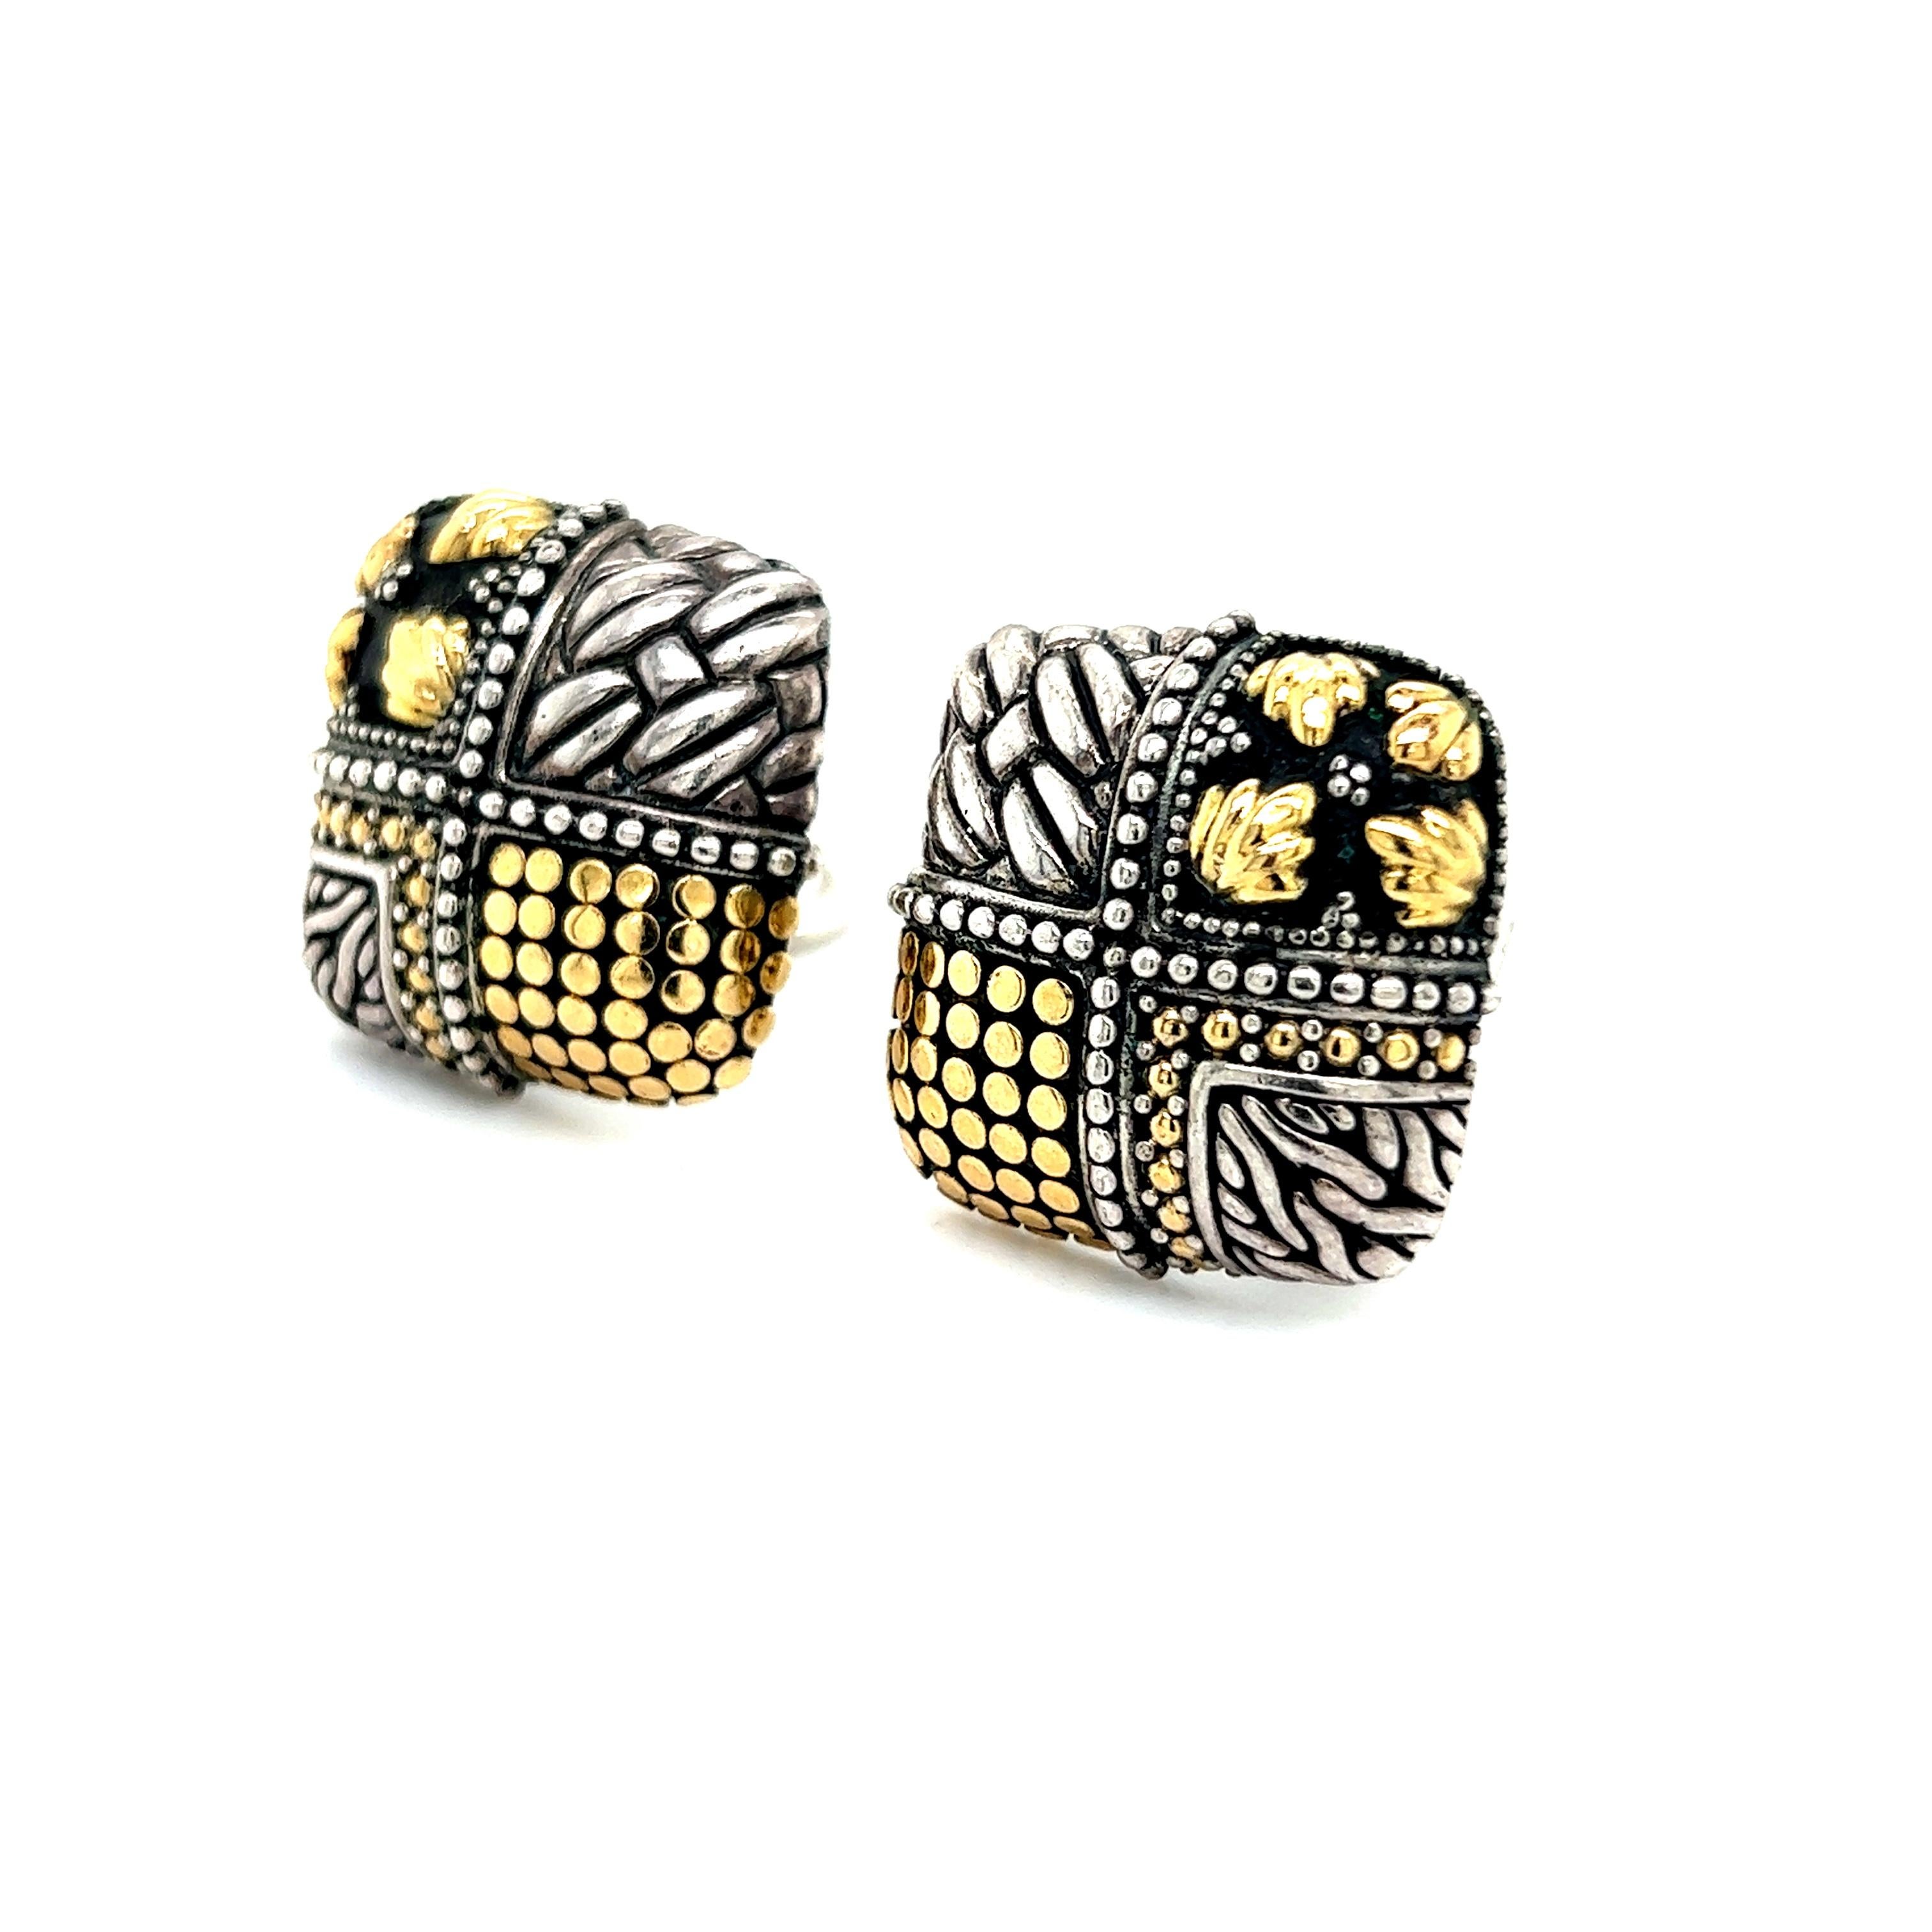 John Hardy Estate Square Ornate Clip-on Earrings 18k Y Gold + Sterling Silver JH27

TRUSTED SELLER SINCE 2002

PLEASE SEE OUR HUNDREDS OF POSITIVE FEEDBACKS FROM OUR CLIENTS!!

FREE SHIPPING!!

DETAILS
Style: Square Ornate
Earrings: Clip-on
Weight: